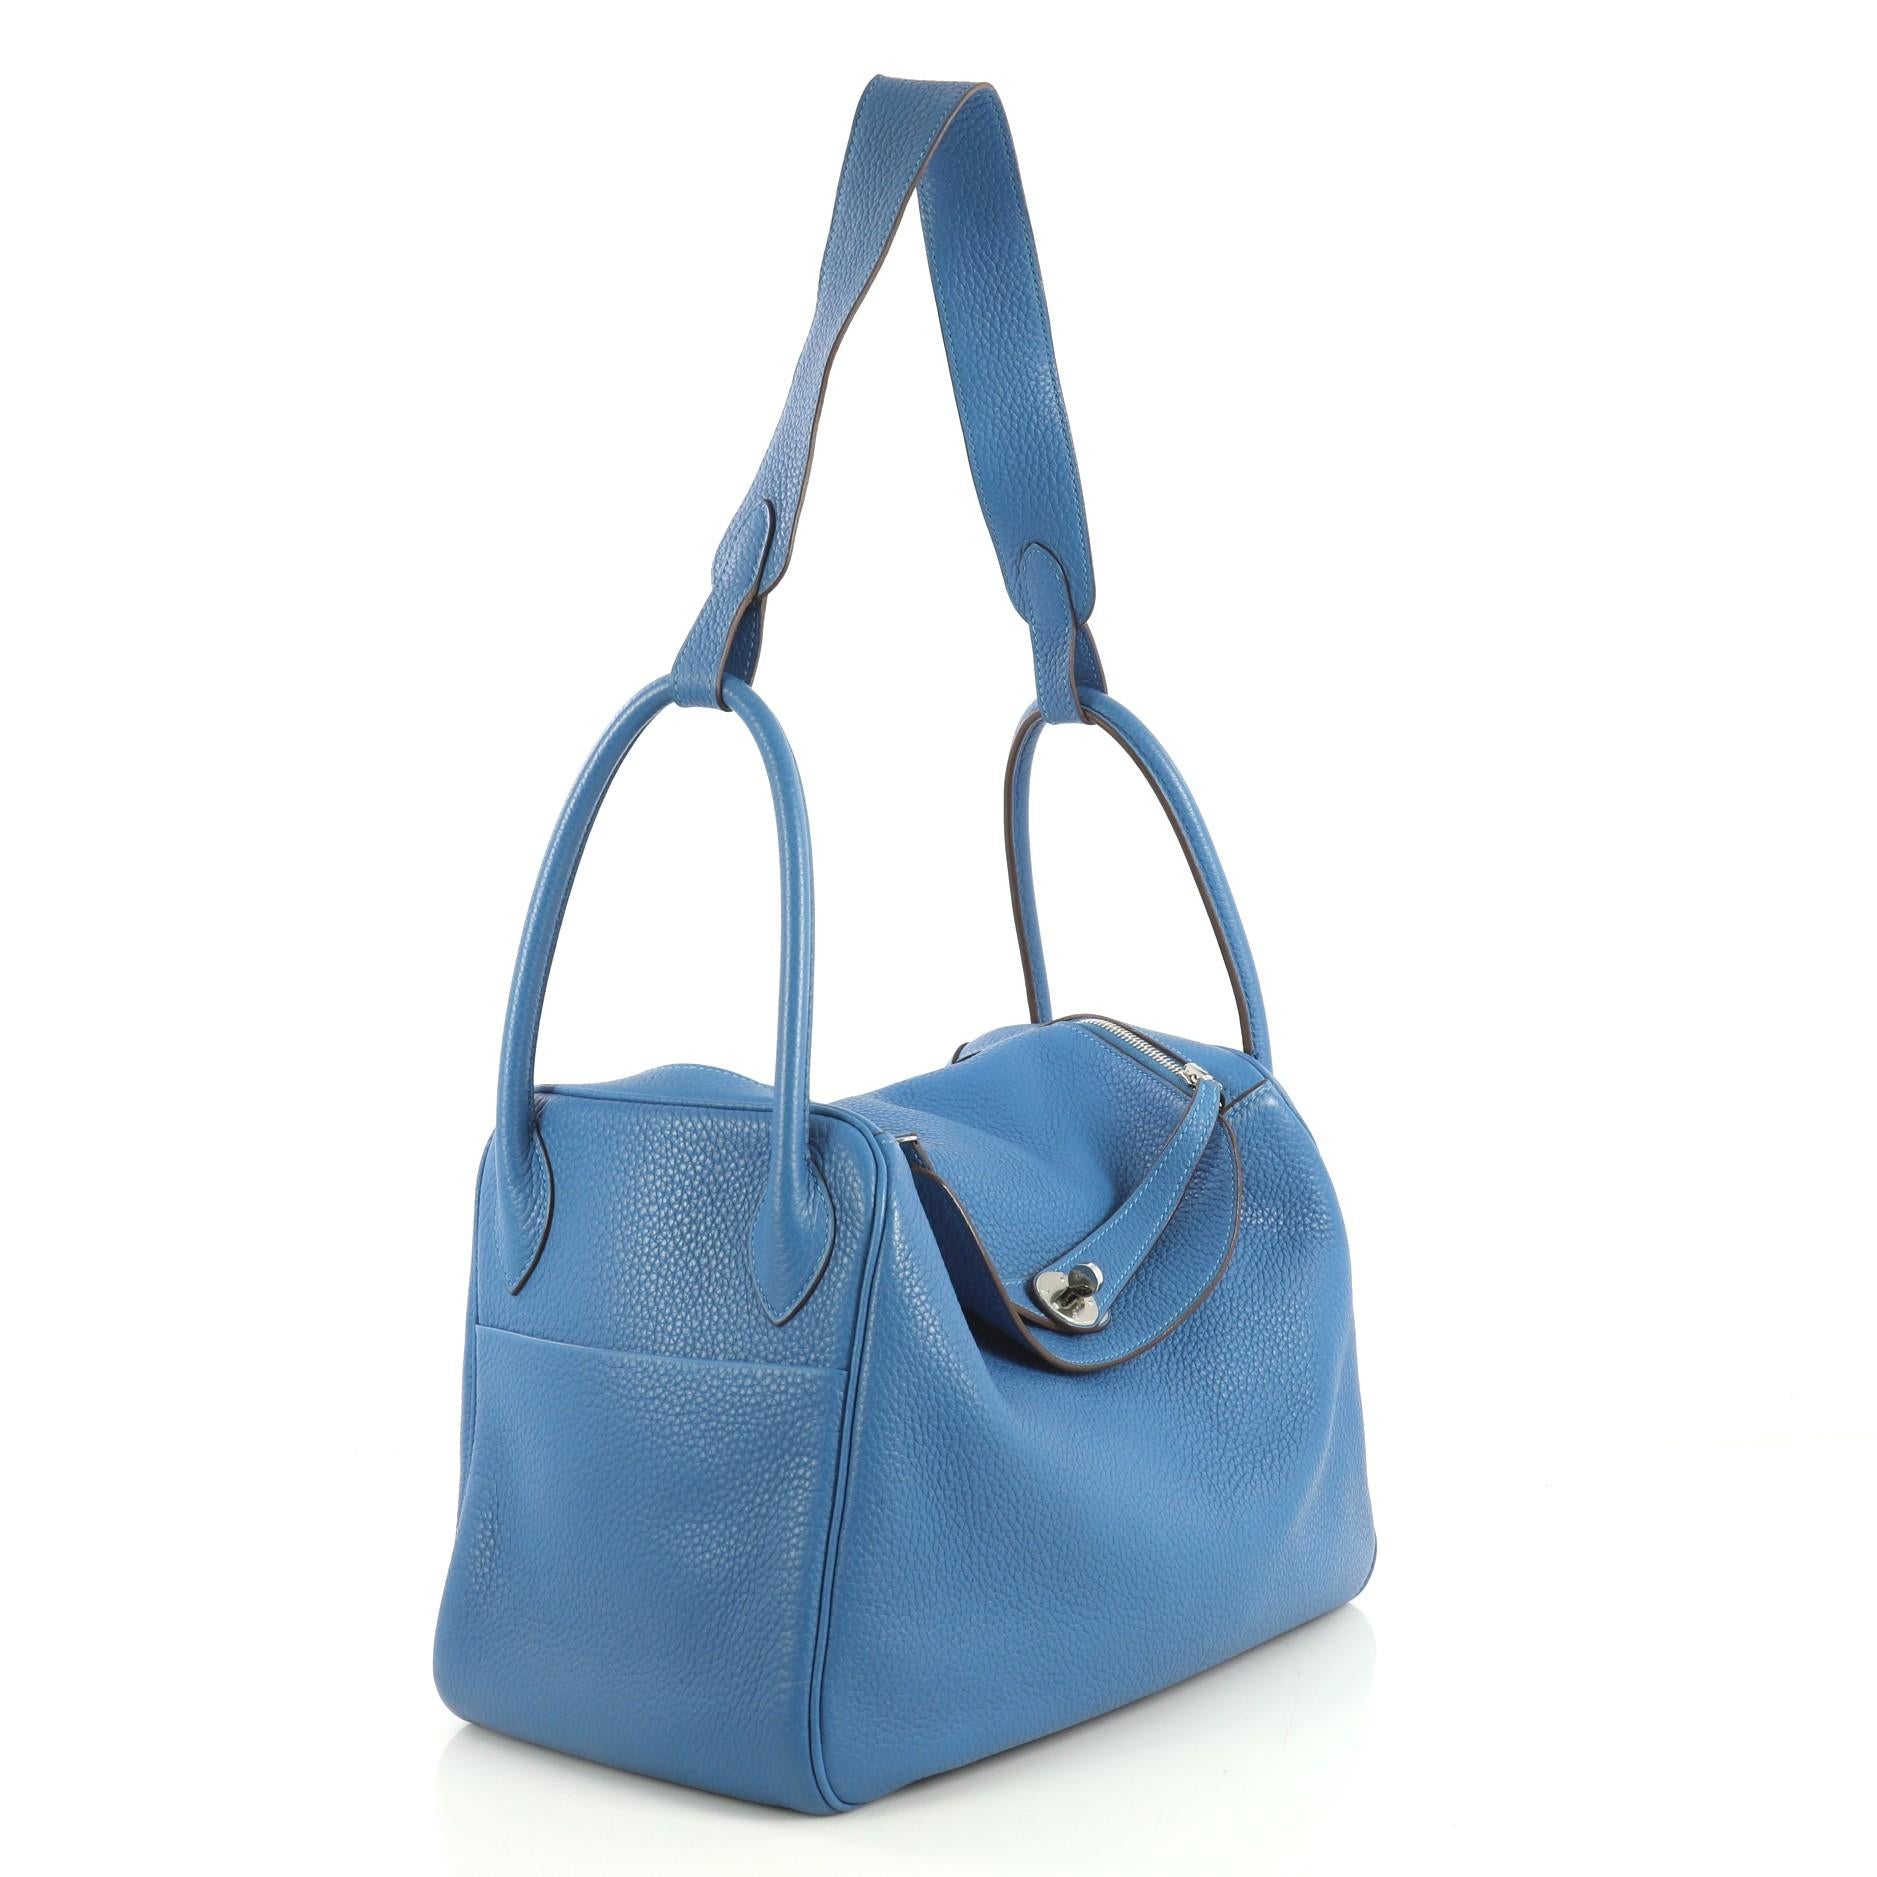 This Hermes Lindy Handbag Clemence 34, crafted from Mykonos blue Clemence leather, features dual rolled handles with a connecting long strap, two side slip pockets, protective base studs, and palladium hardware. Its double zip closure opens to a